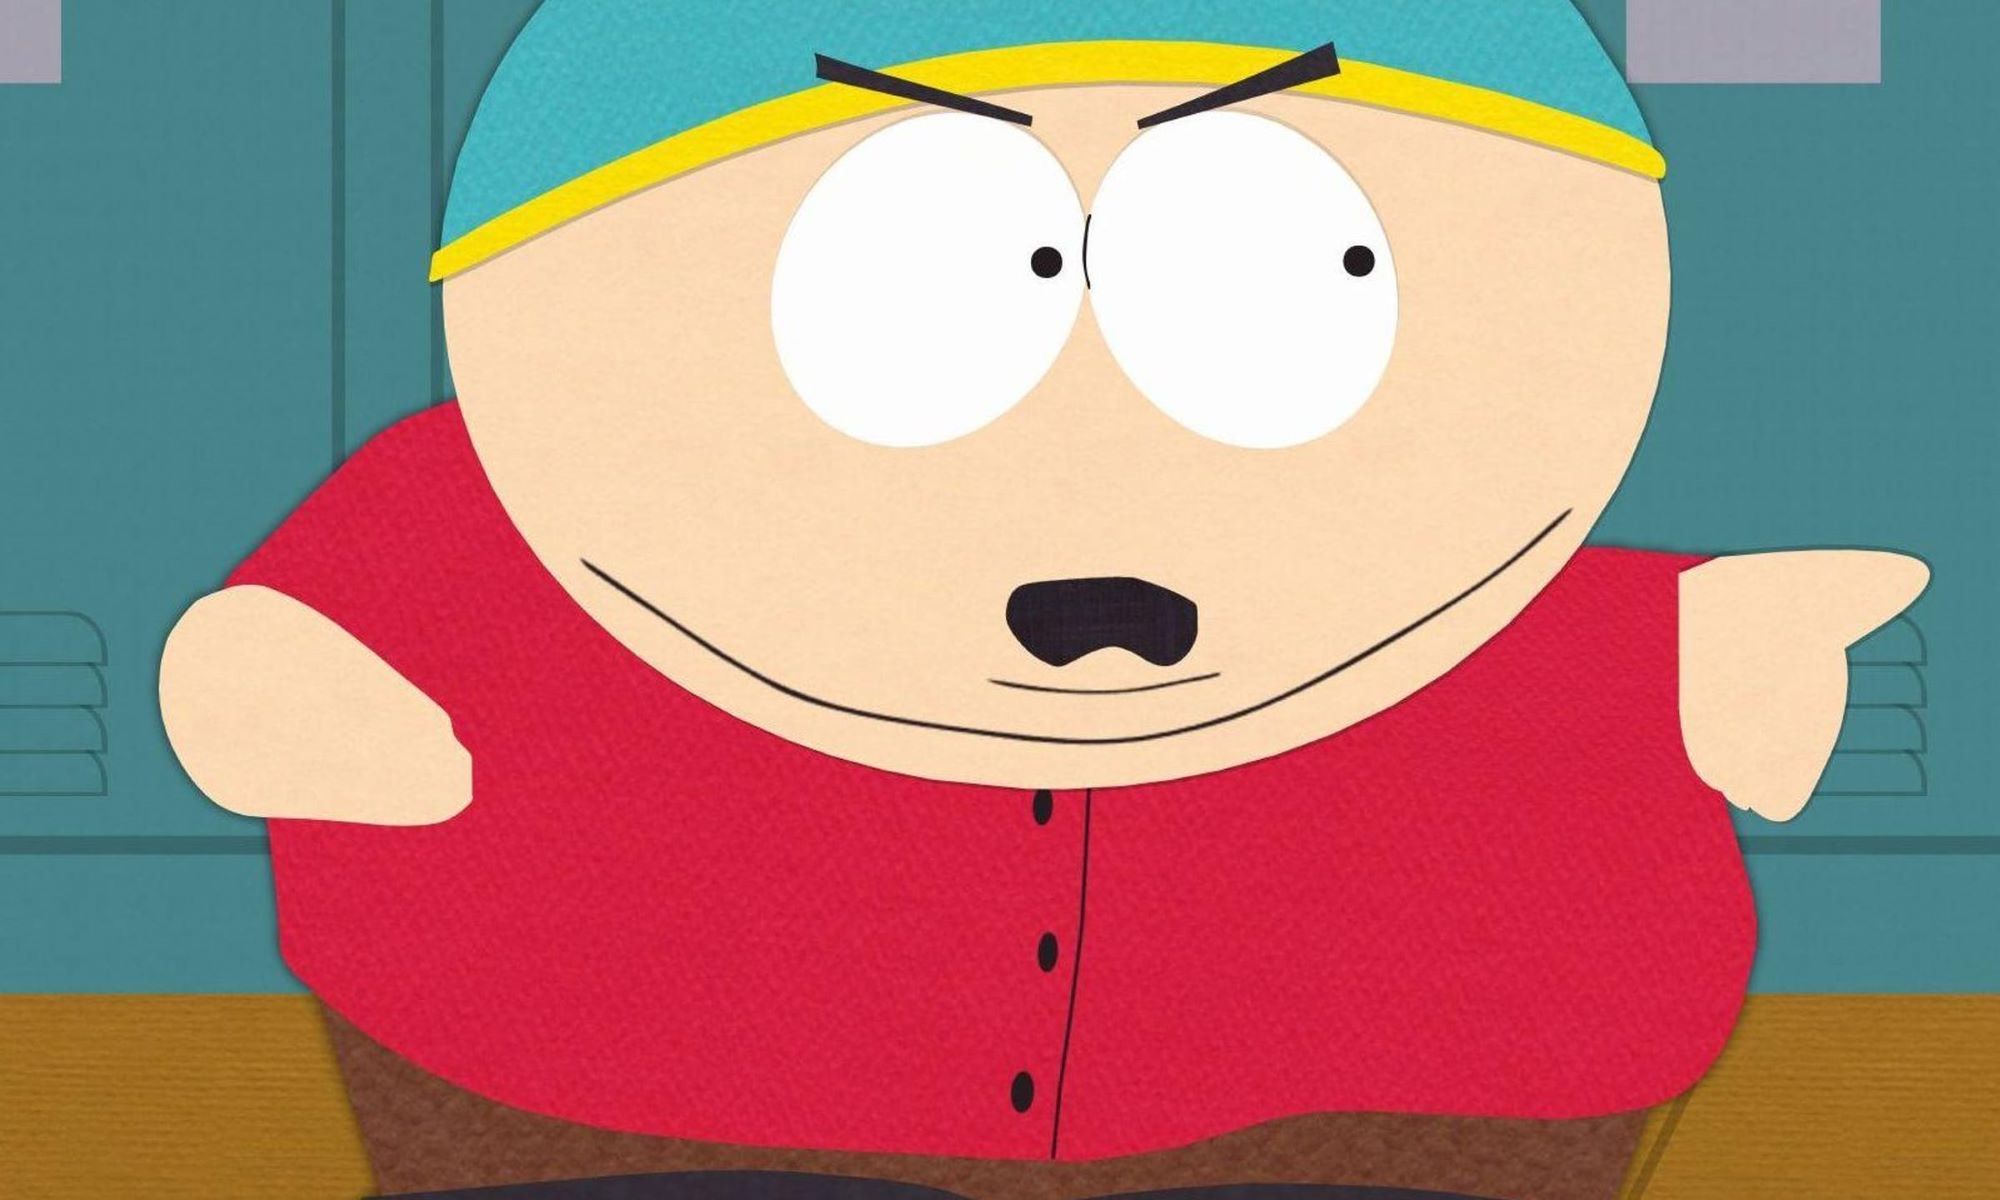 Master The Art Of Realistic Cartman Drawing With These Creative Tips!